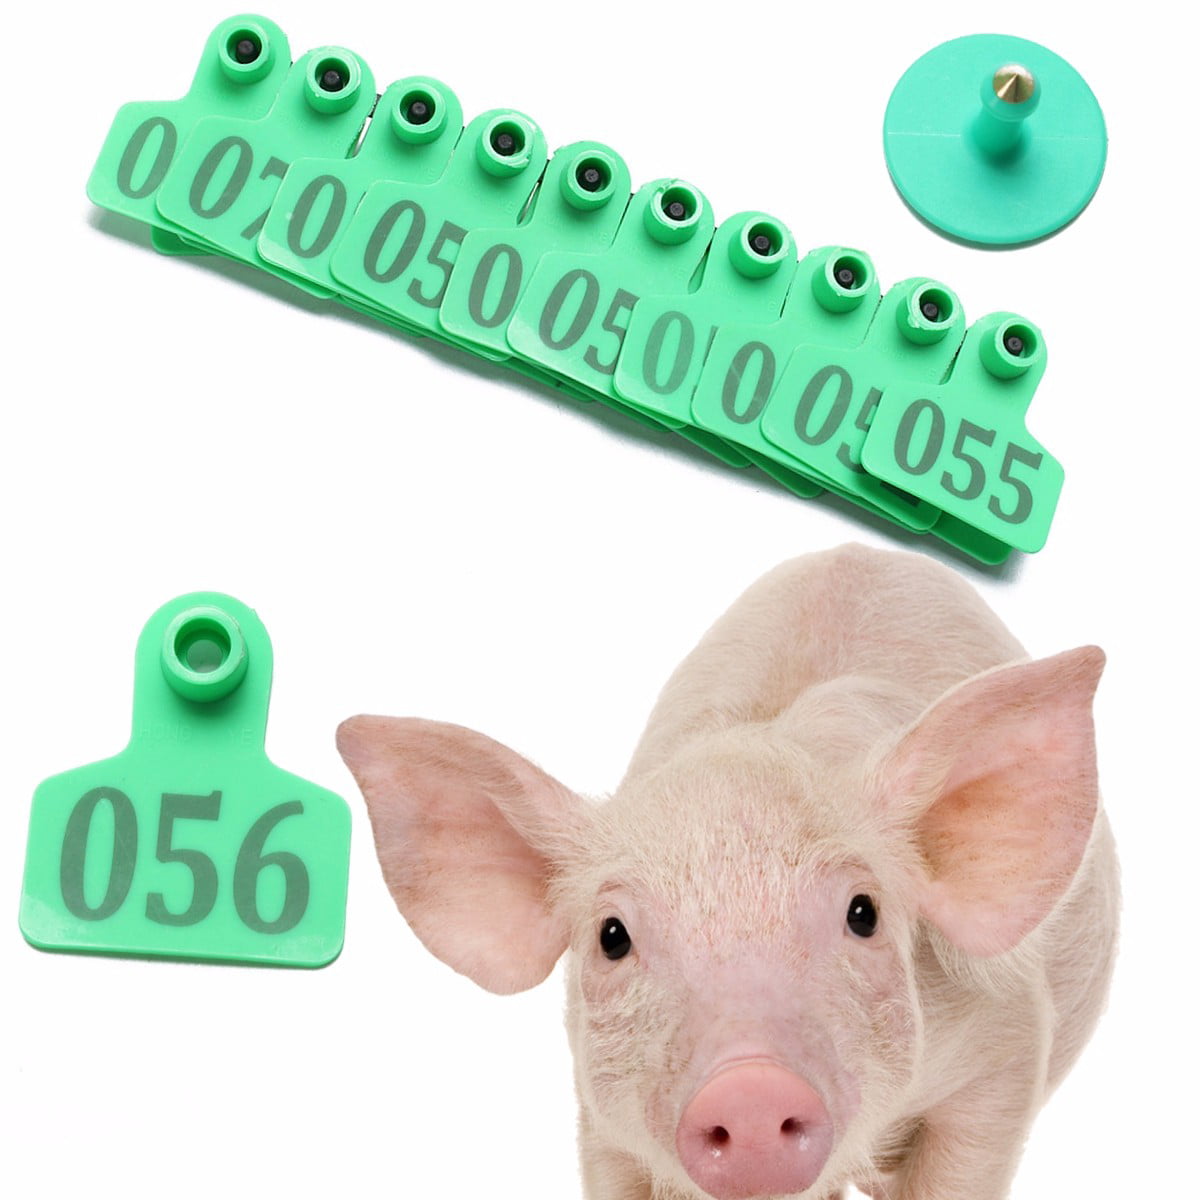 100 Set Sheep Goat Pig Cattle Cow Livestock Ear Number Tag 001-100 Farm Animal 